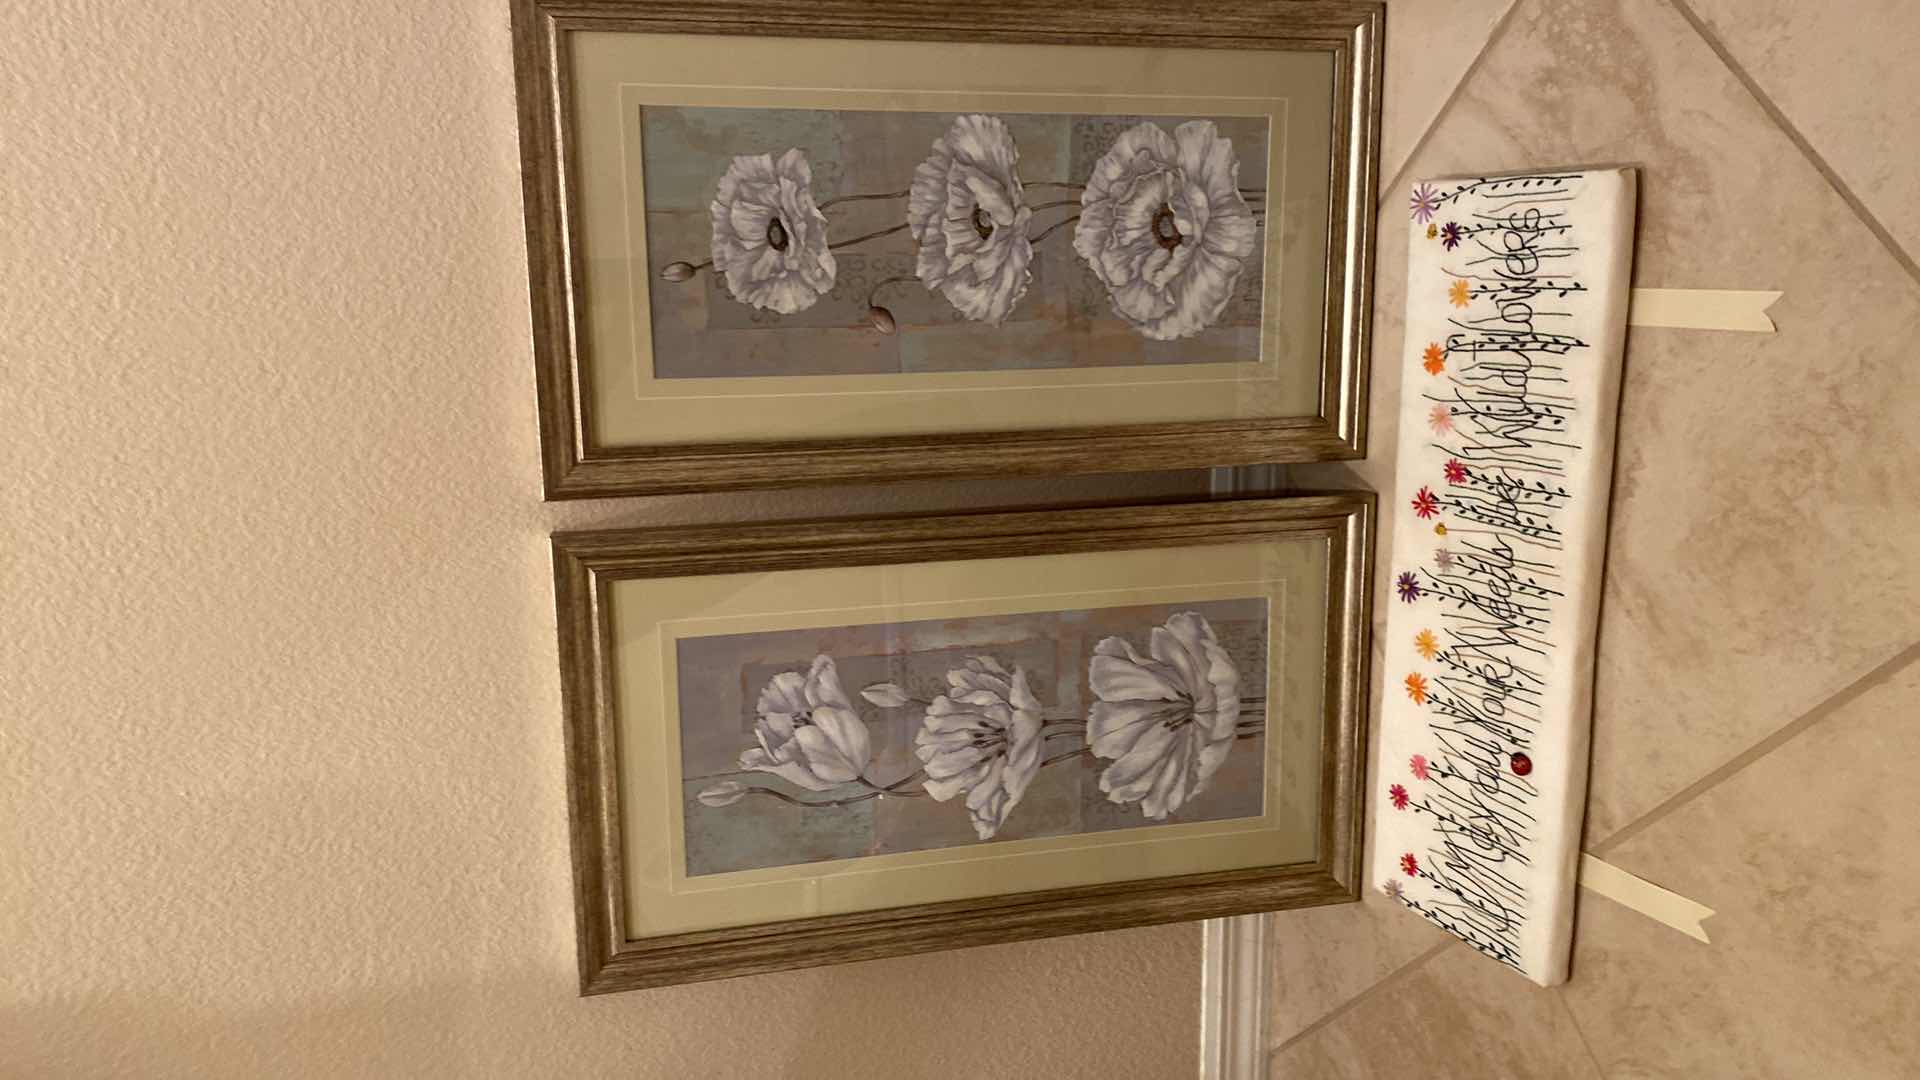 Photo 6 of PAIR OF FRAMED FLORAL ARTWORKS 14 1/2“ x 26 1/2“ AND FABRIC WALL DECOR